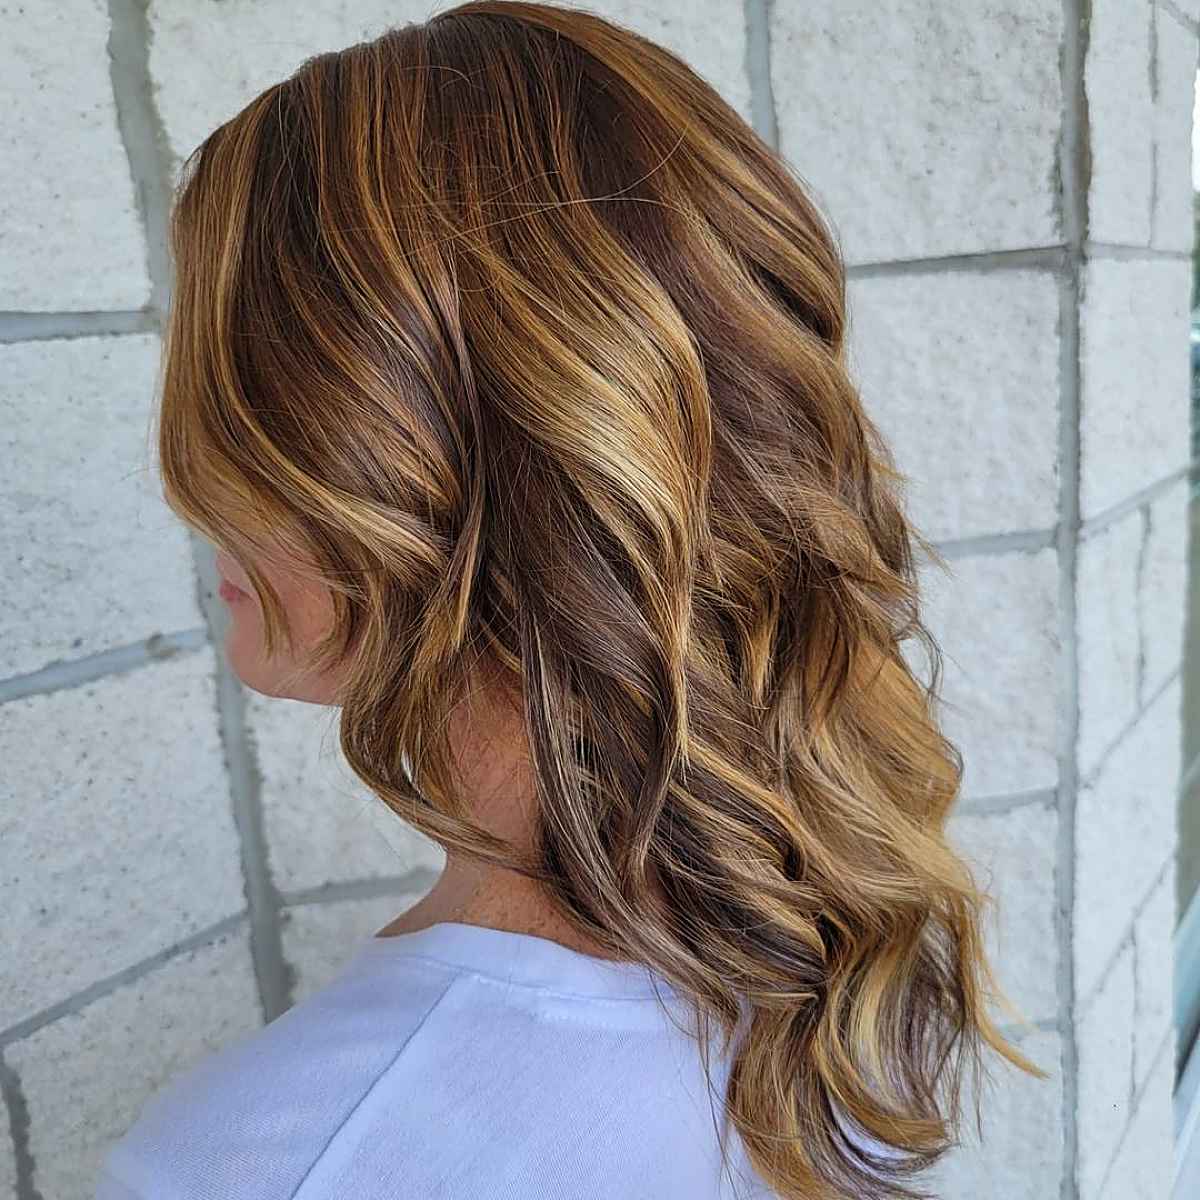 Top 19 Fall Hair Colors for Older Women in 2023